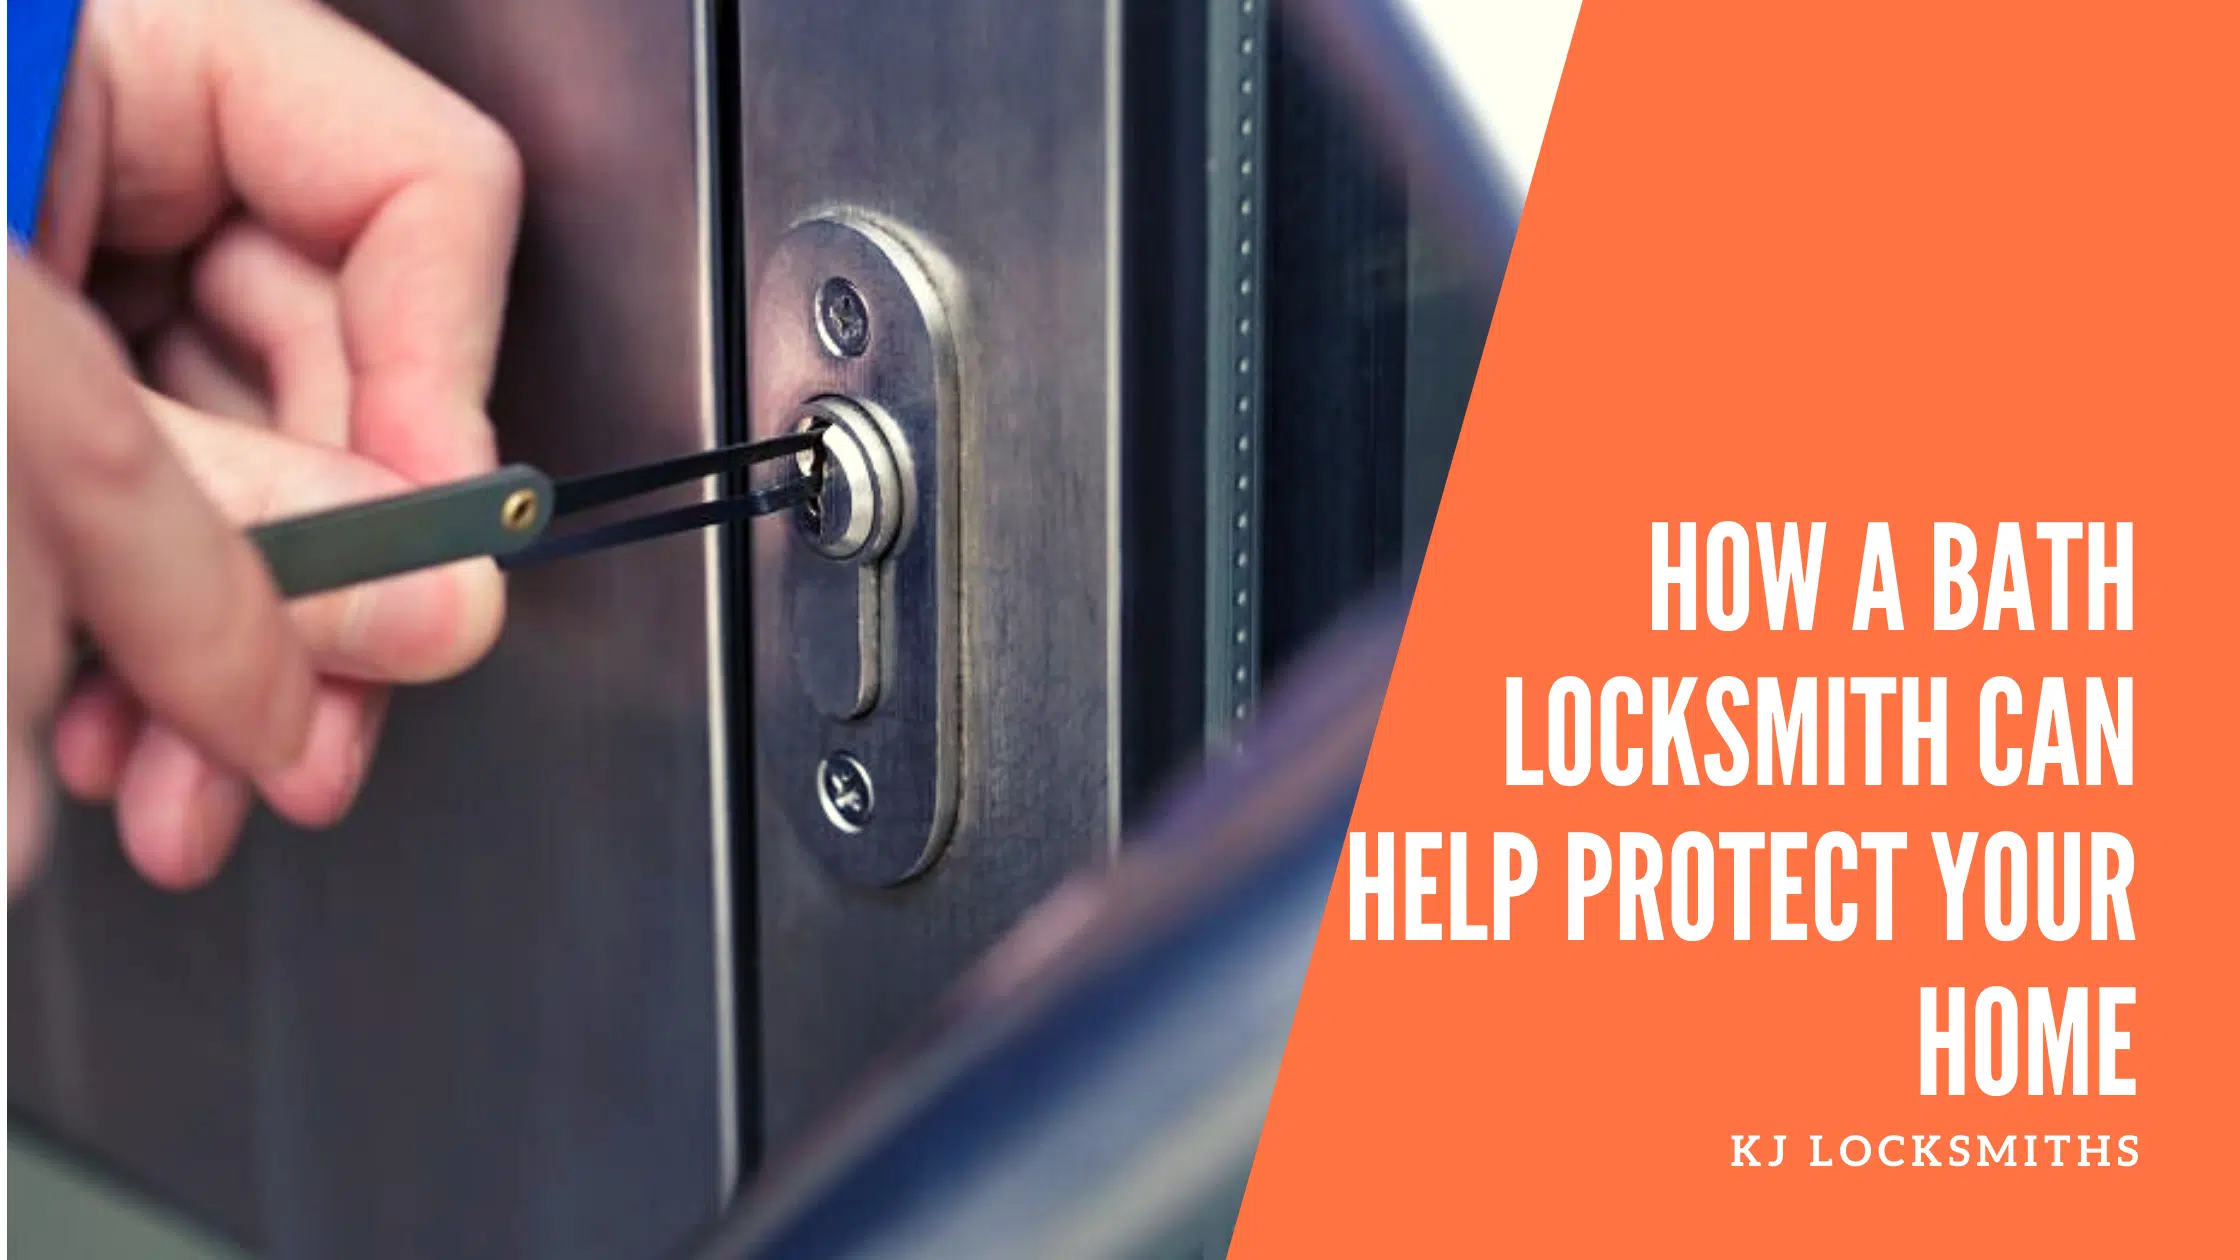 How A Bath Locksmith Can Help Protect Your Home